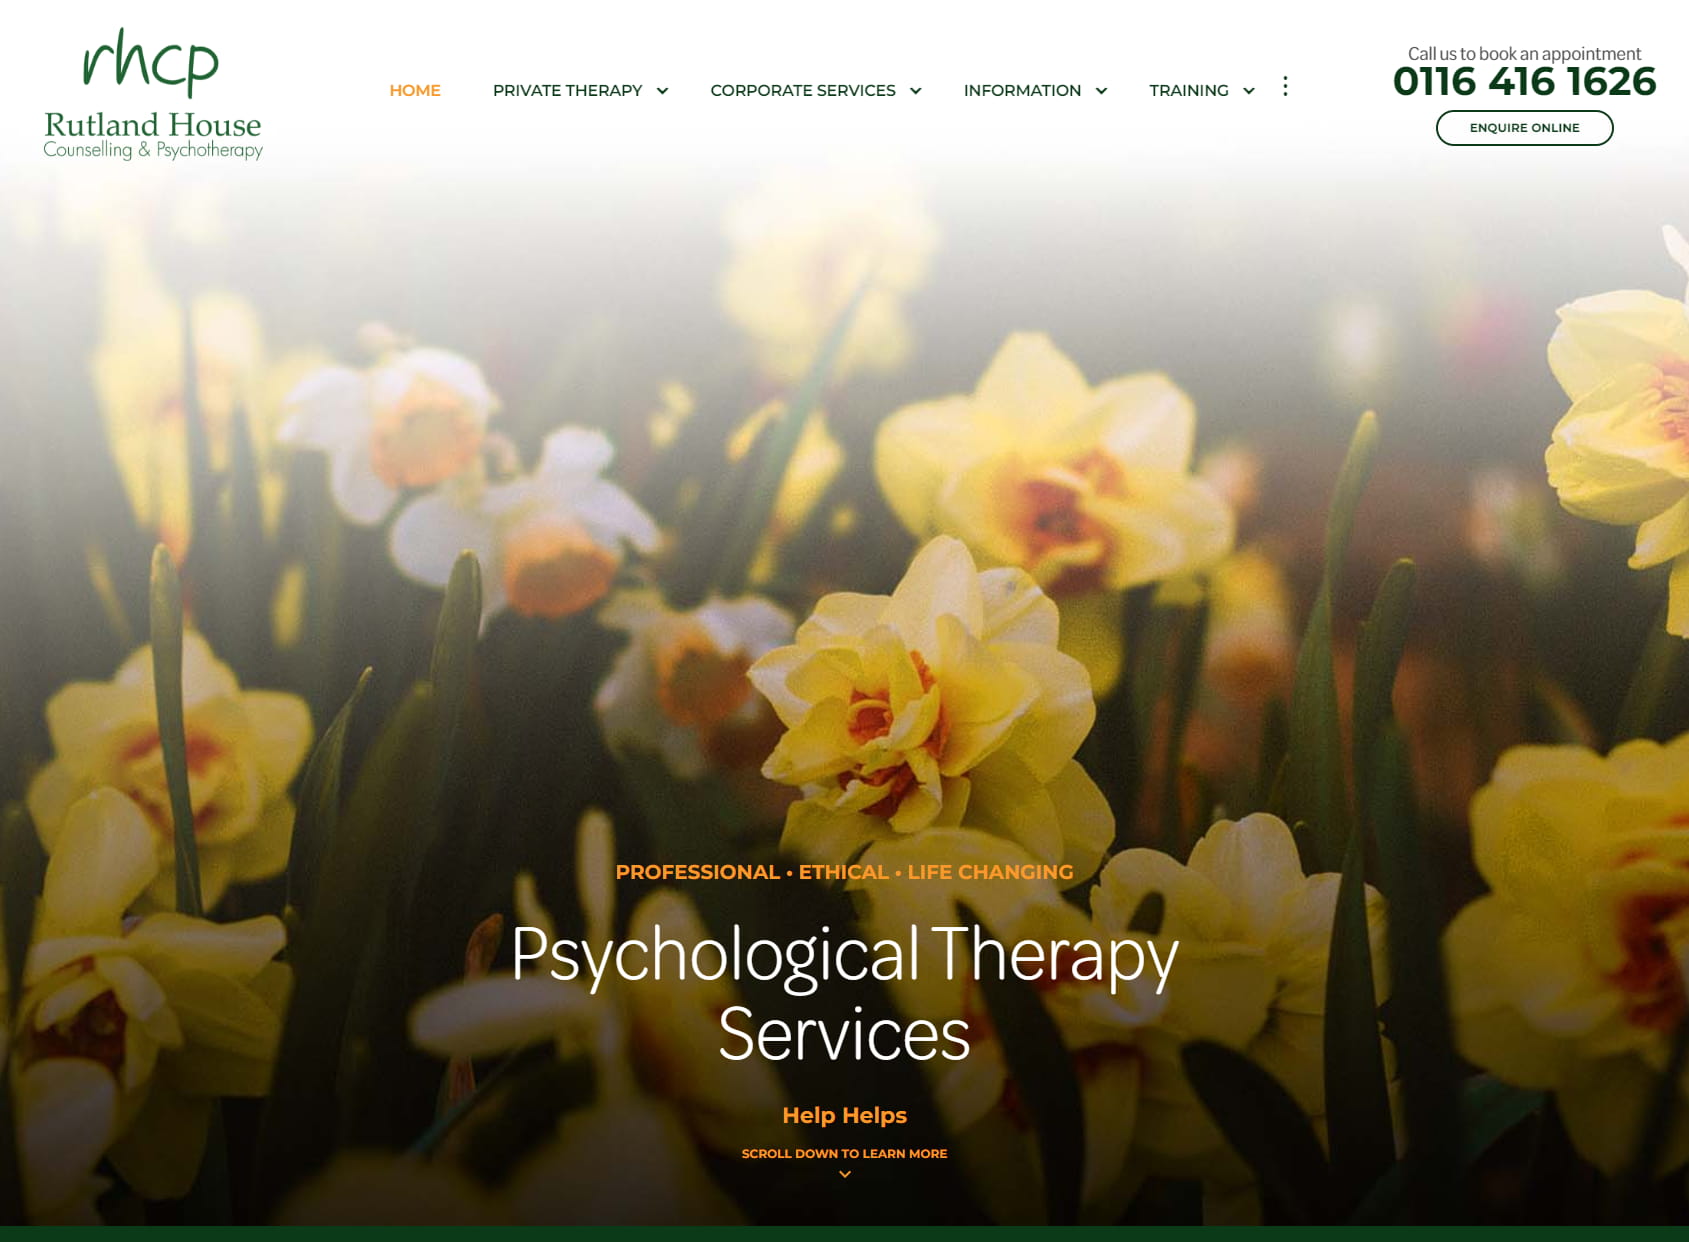 RHCP - Rutland House Counselling & Psychotherapy